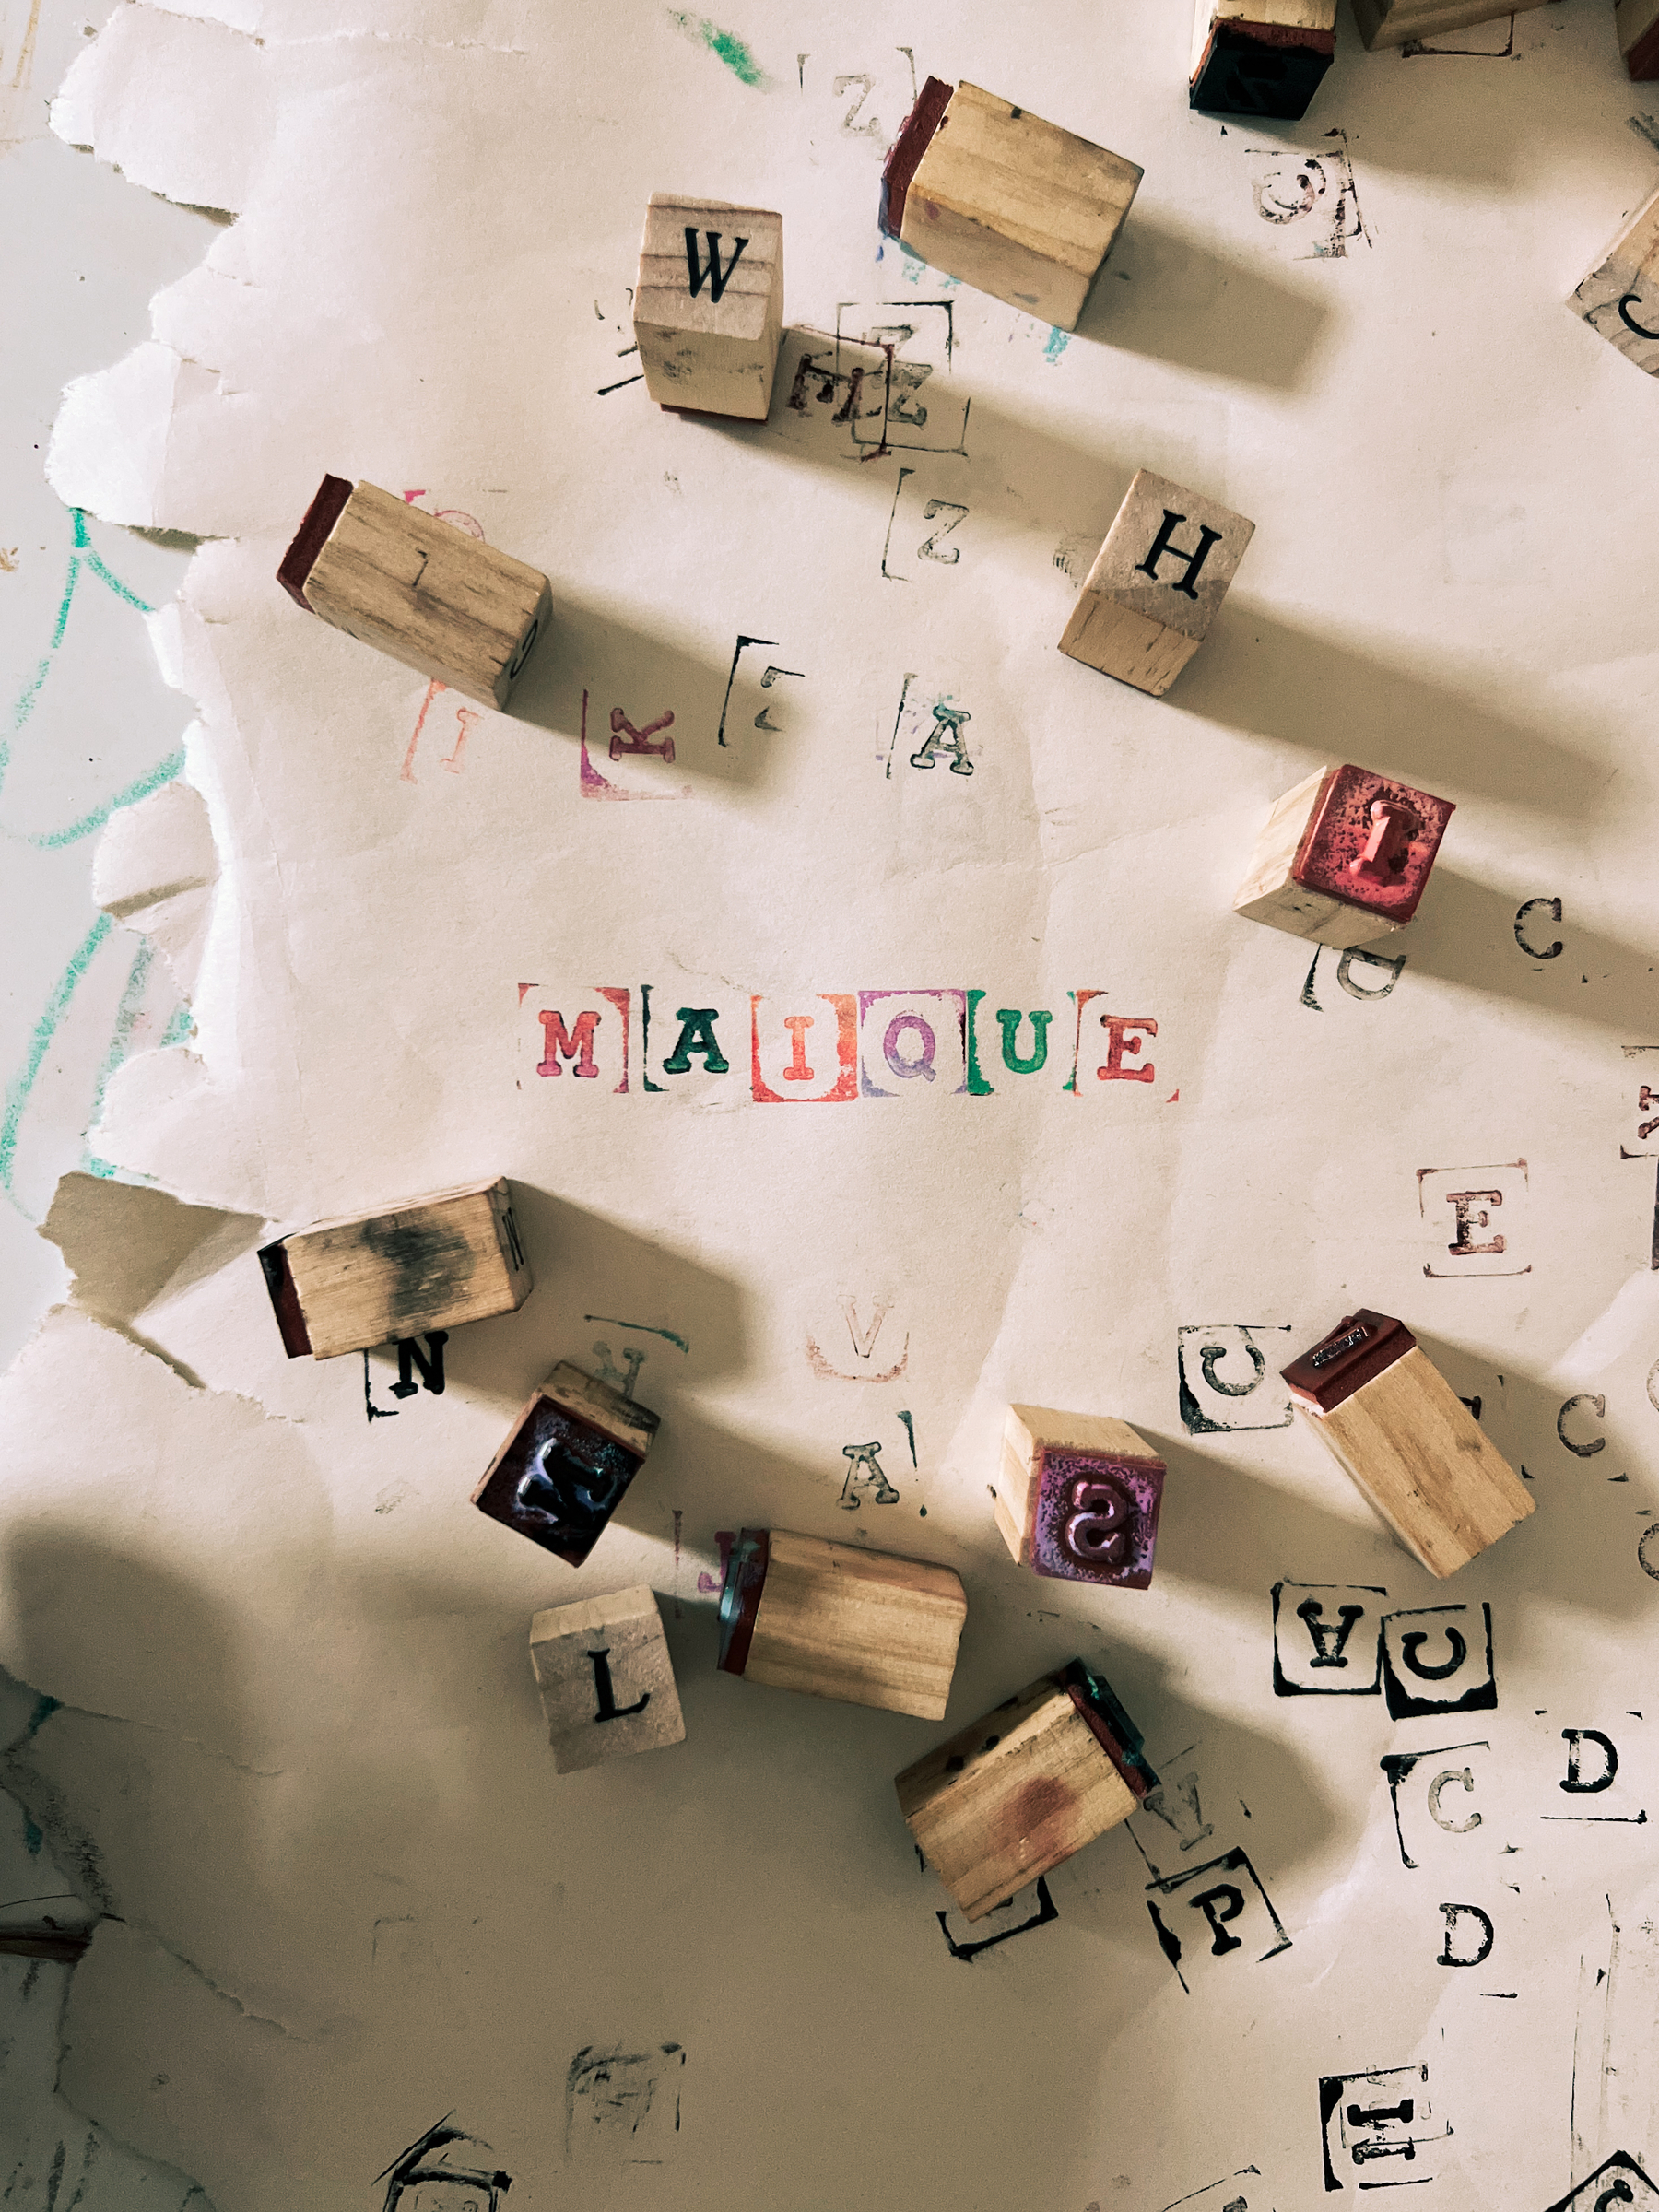 The word &ldquo;maique&rdquo; in individual letters, stamped on paper. Stamps are spread all over.